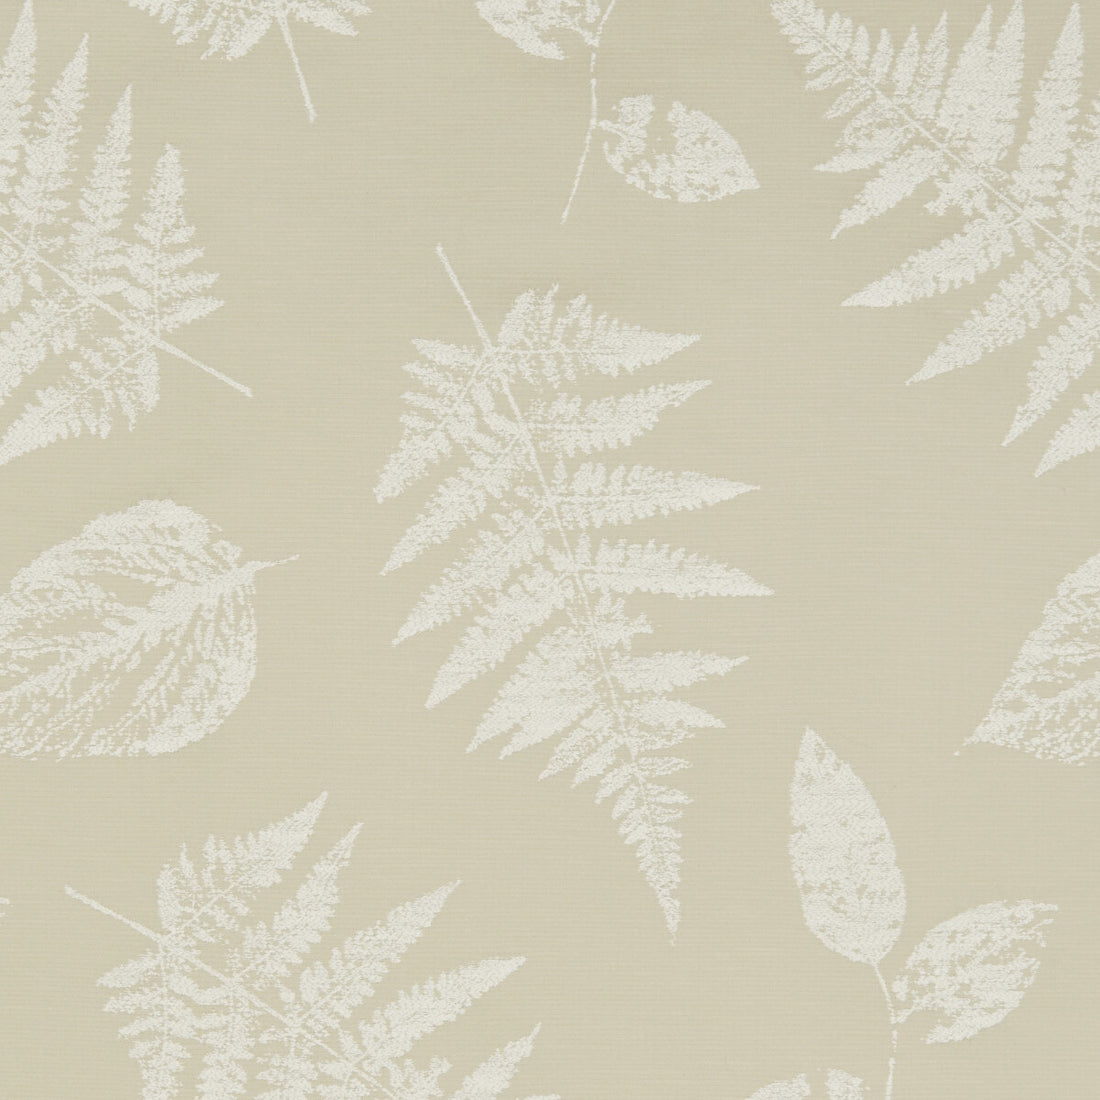 Foliage fabric in sand color - pattern F1059/05.CAC.0 - by Clarke And Clarke in the Organics By Studio G For C&amp;C collection